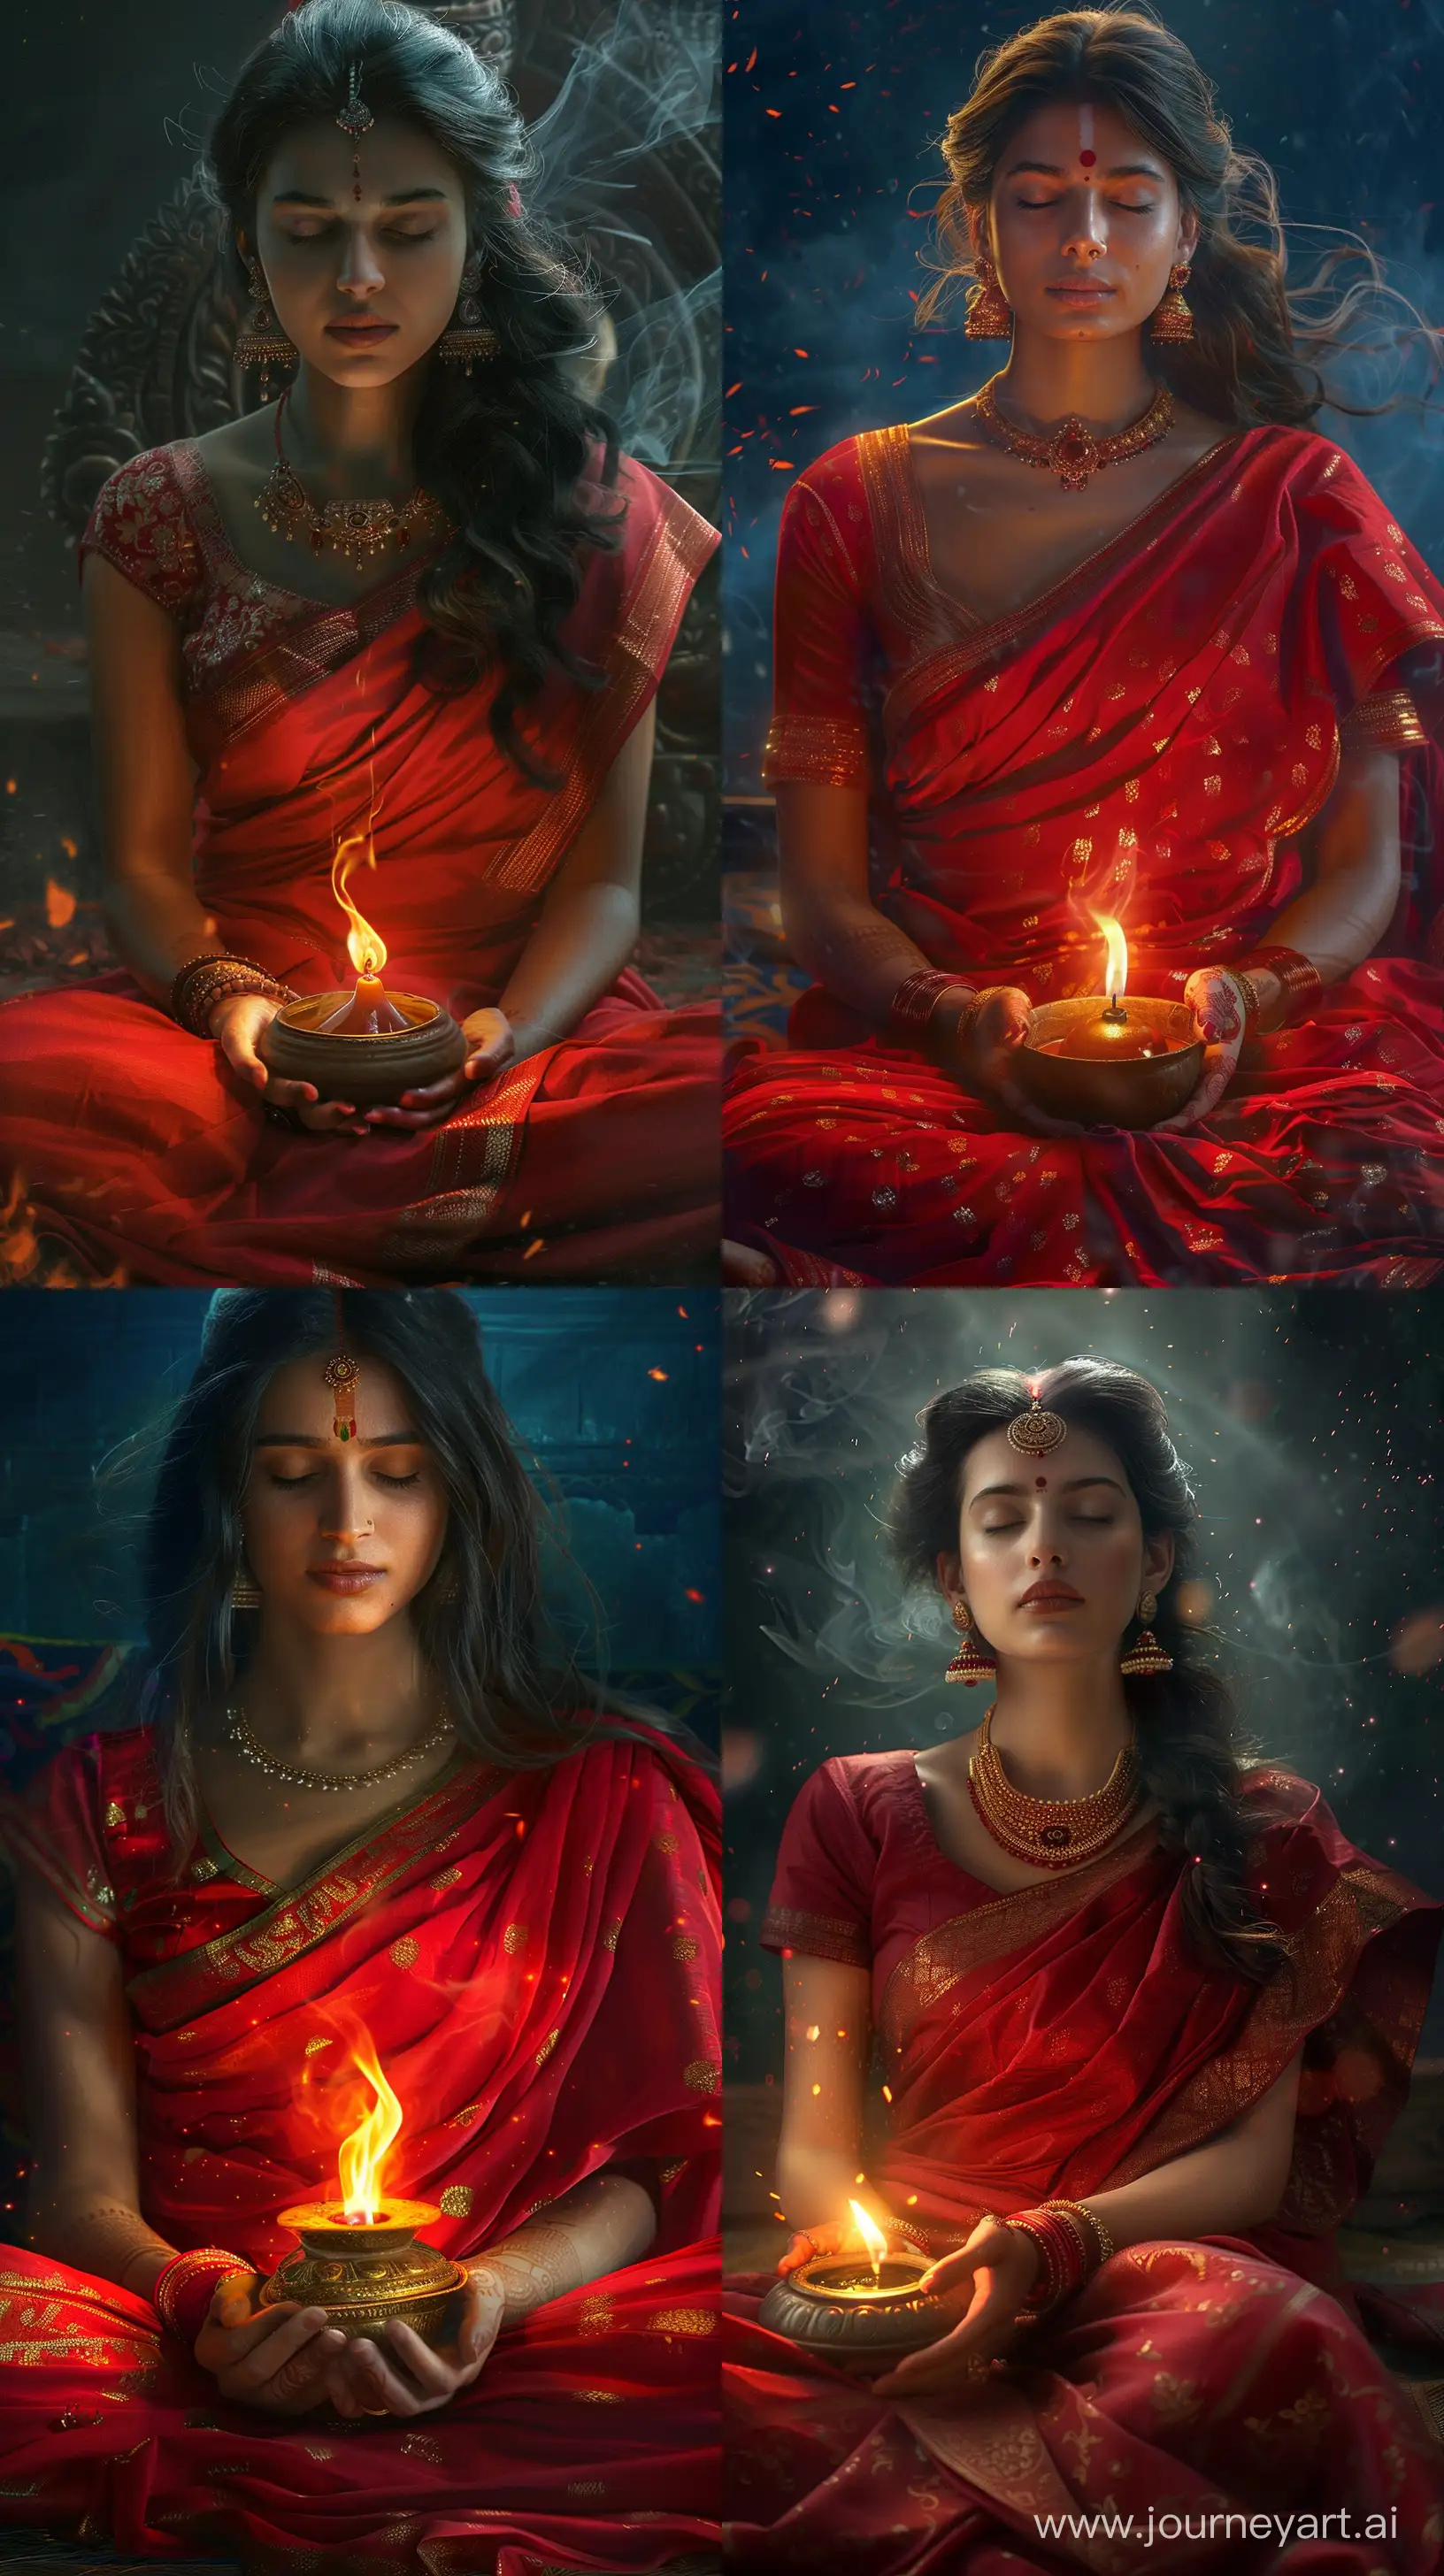 Realistic colorful images of an Indian woman from ancient times in red saree, seated holding a traditional oil lamp( diya) that is lighted up, she's closing her eyes, intricate details, night time, close-up image, 8k quality --ar 9:16